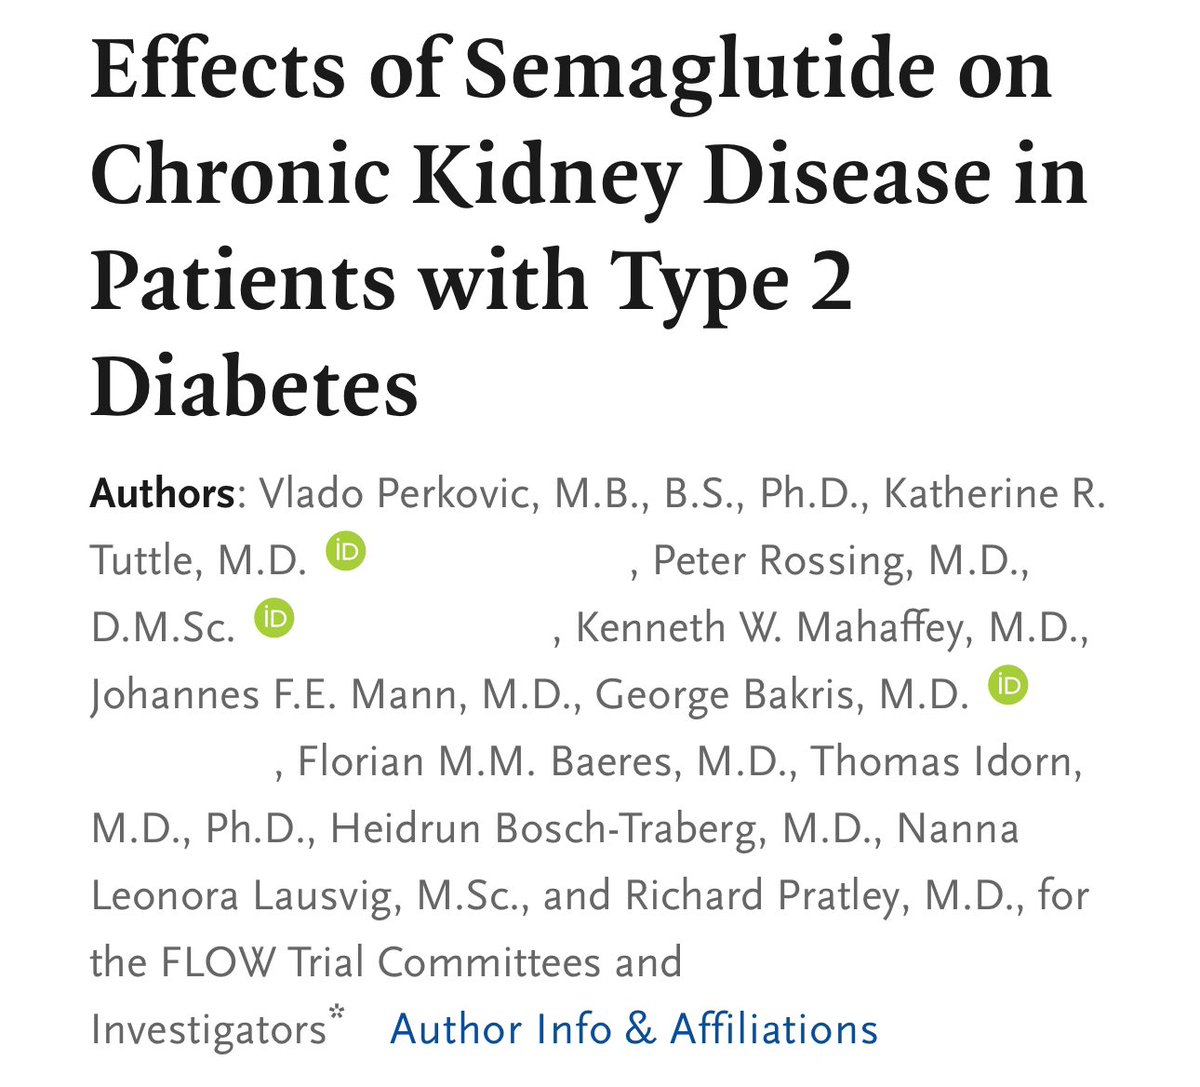 🔴 Effects of Semaglutide on Chronic Kidney Disease in Patients with Type 2 Diabetes @NEJM ‼️ 👥3533 ↘️24% lower in the semaglutide group 🆚placebo group 👉Results were similar for a composite of the kidney-specific components of the primary outcome & CV ☠️ 🔥🔥Semaglutide ↘️